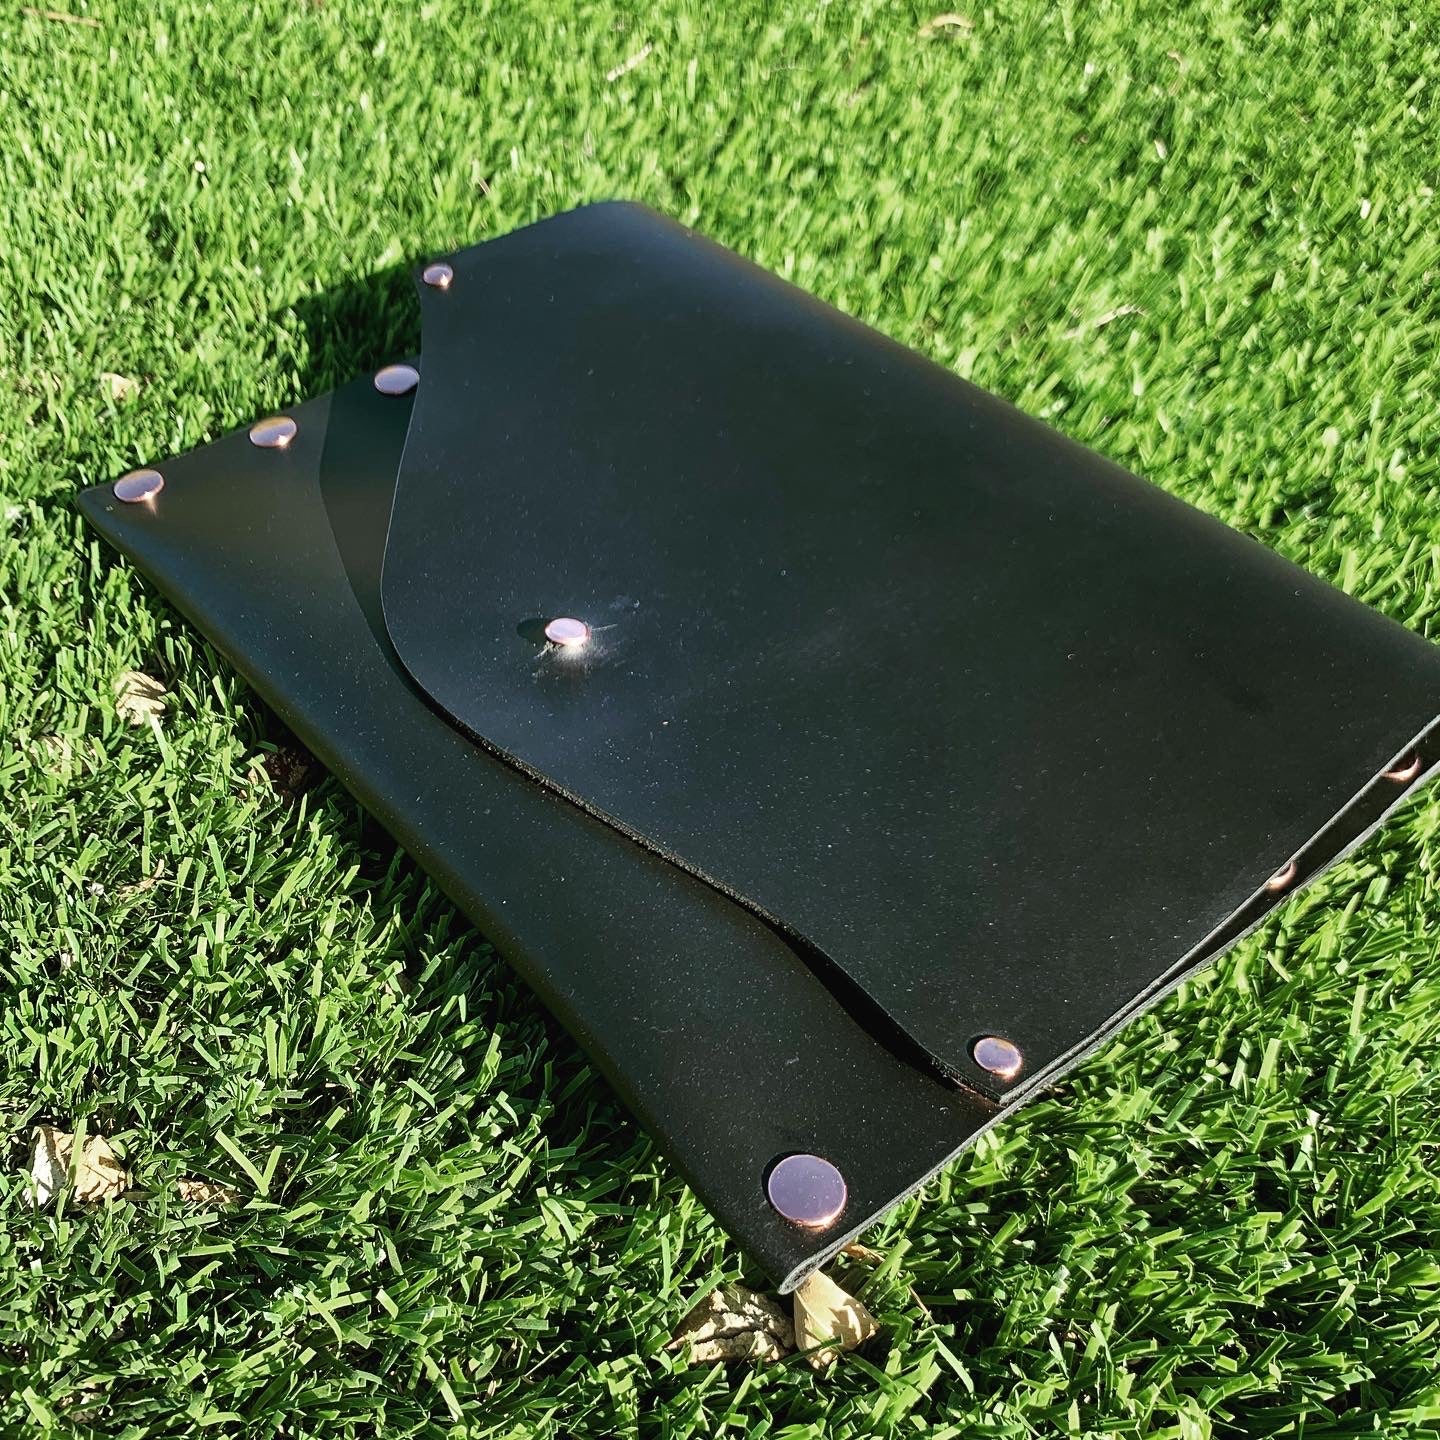 Black Leather Clutch with Copper Rivets